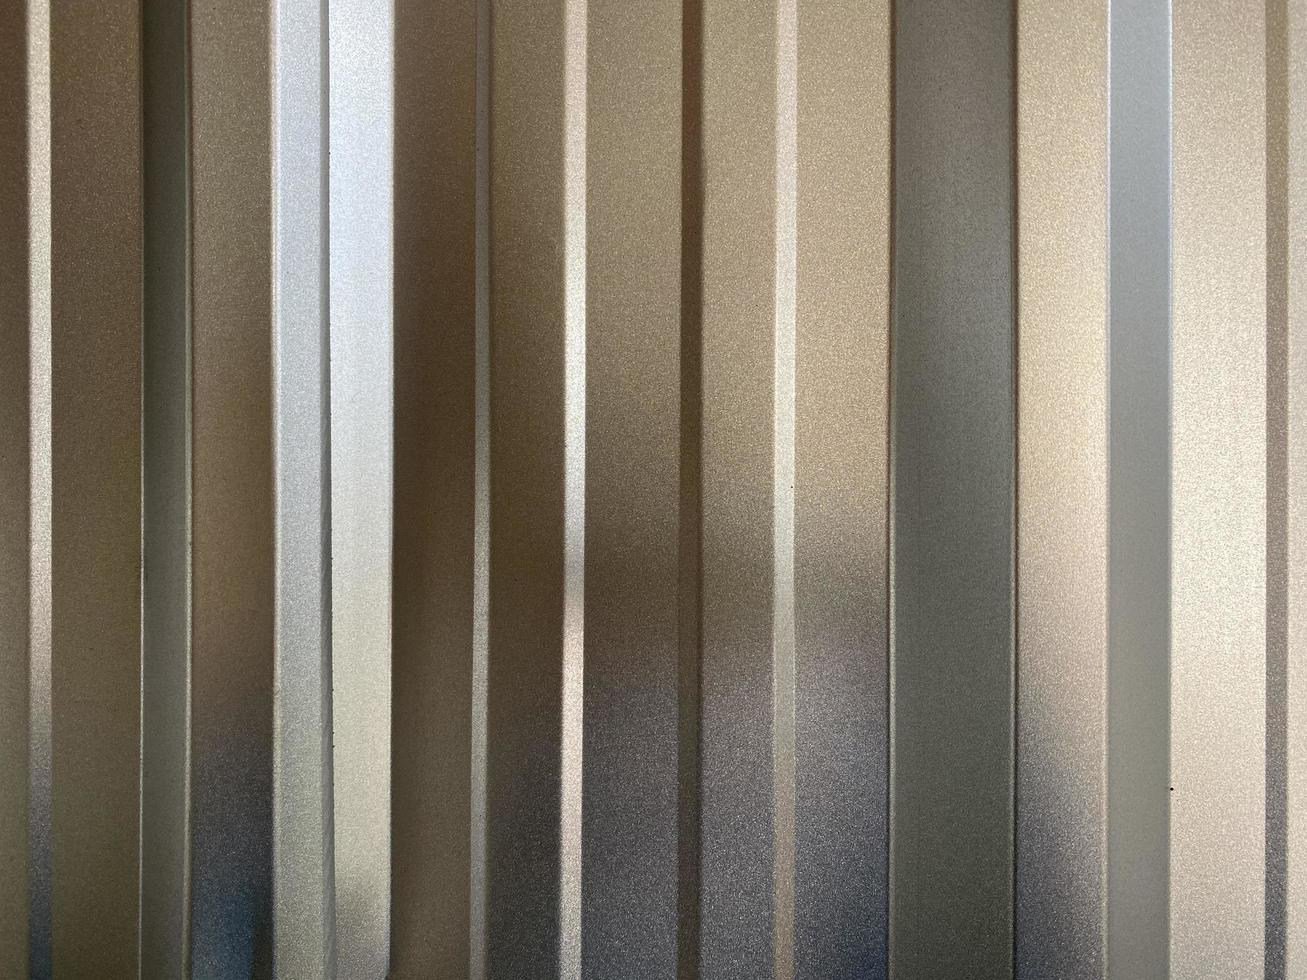 light metal surface, stainless steel plate with a longitudinal pattern.surface, Rough texture, use for a background. Macro image. Concept of a seamless. photo